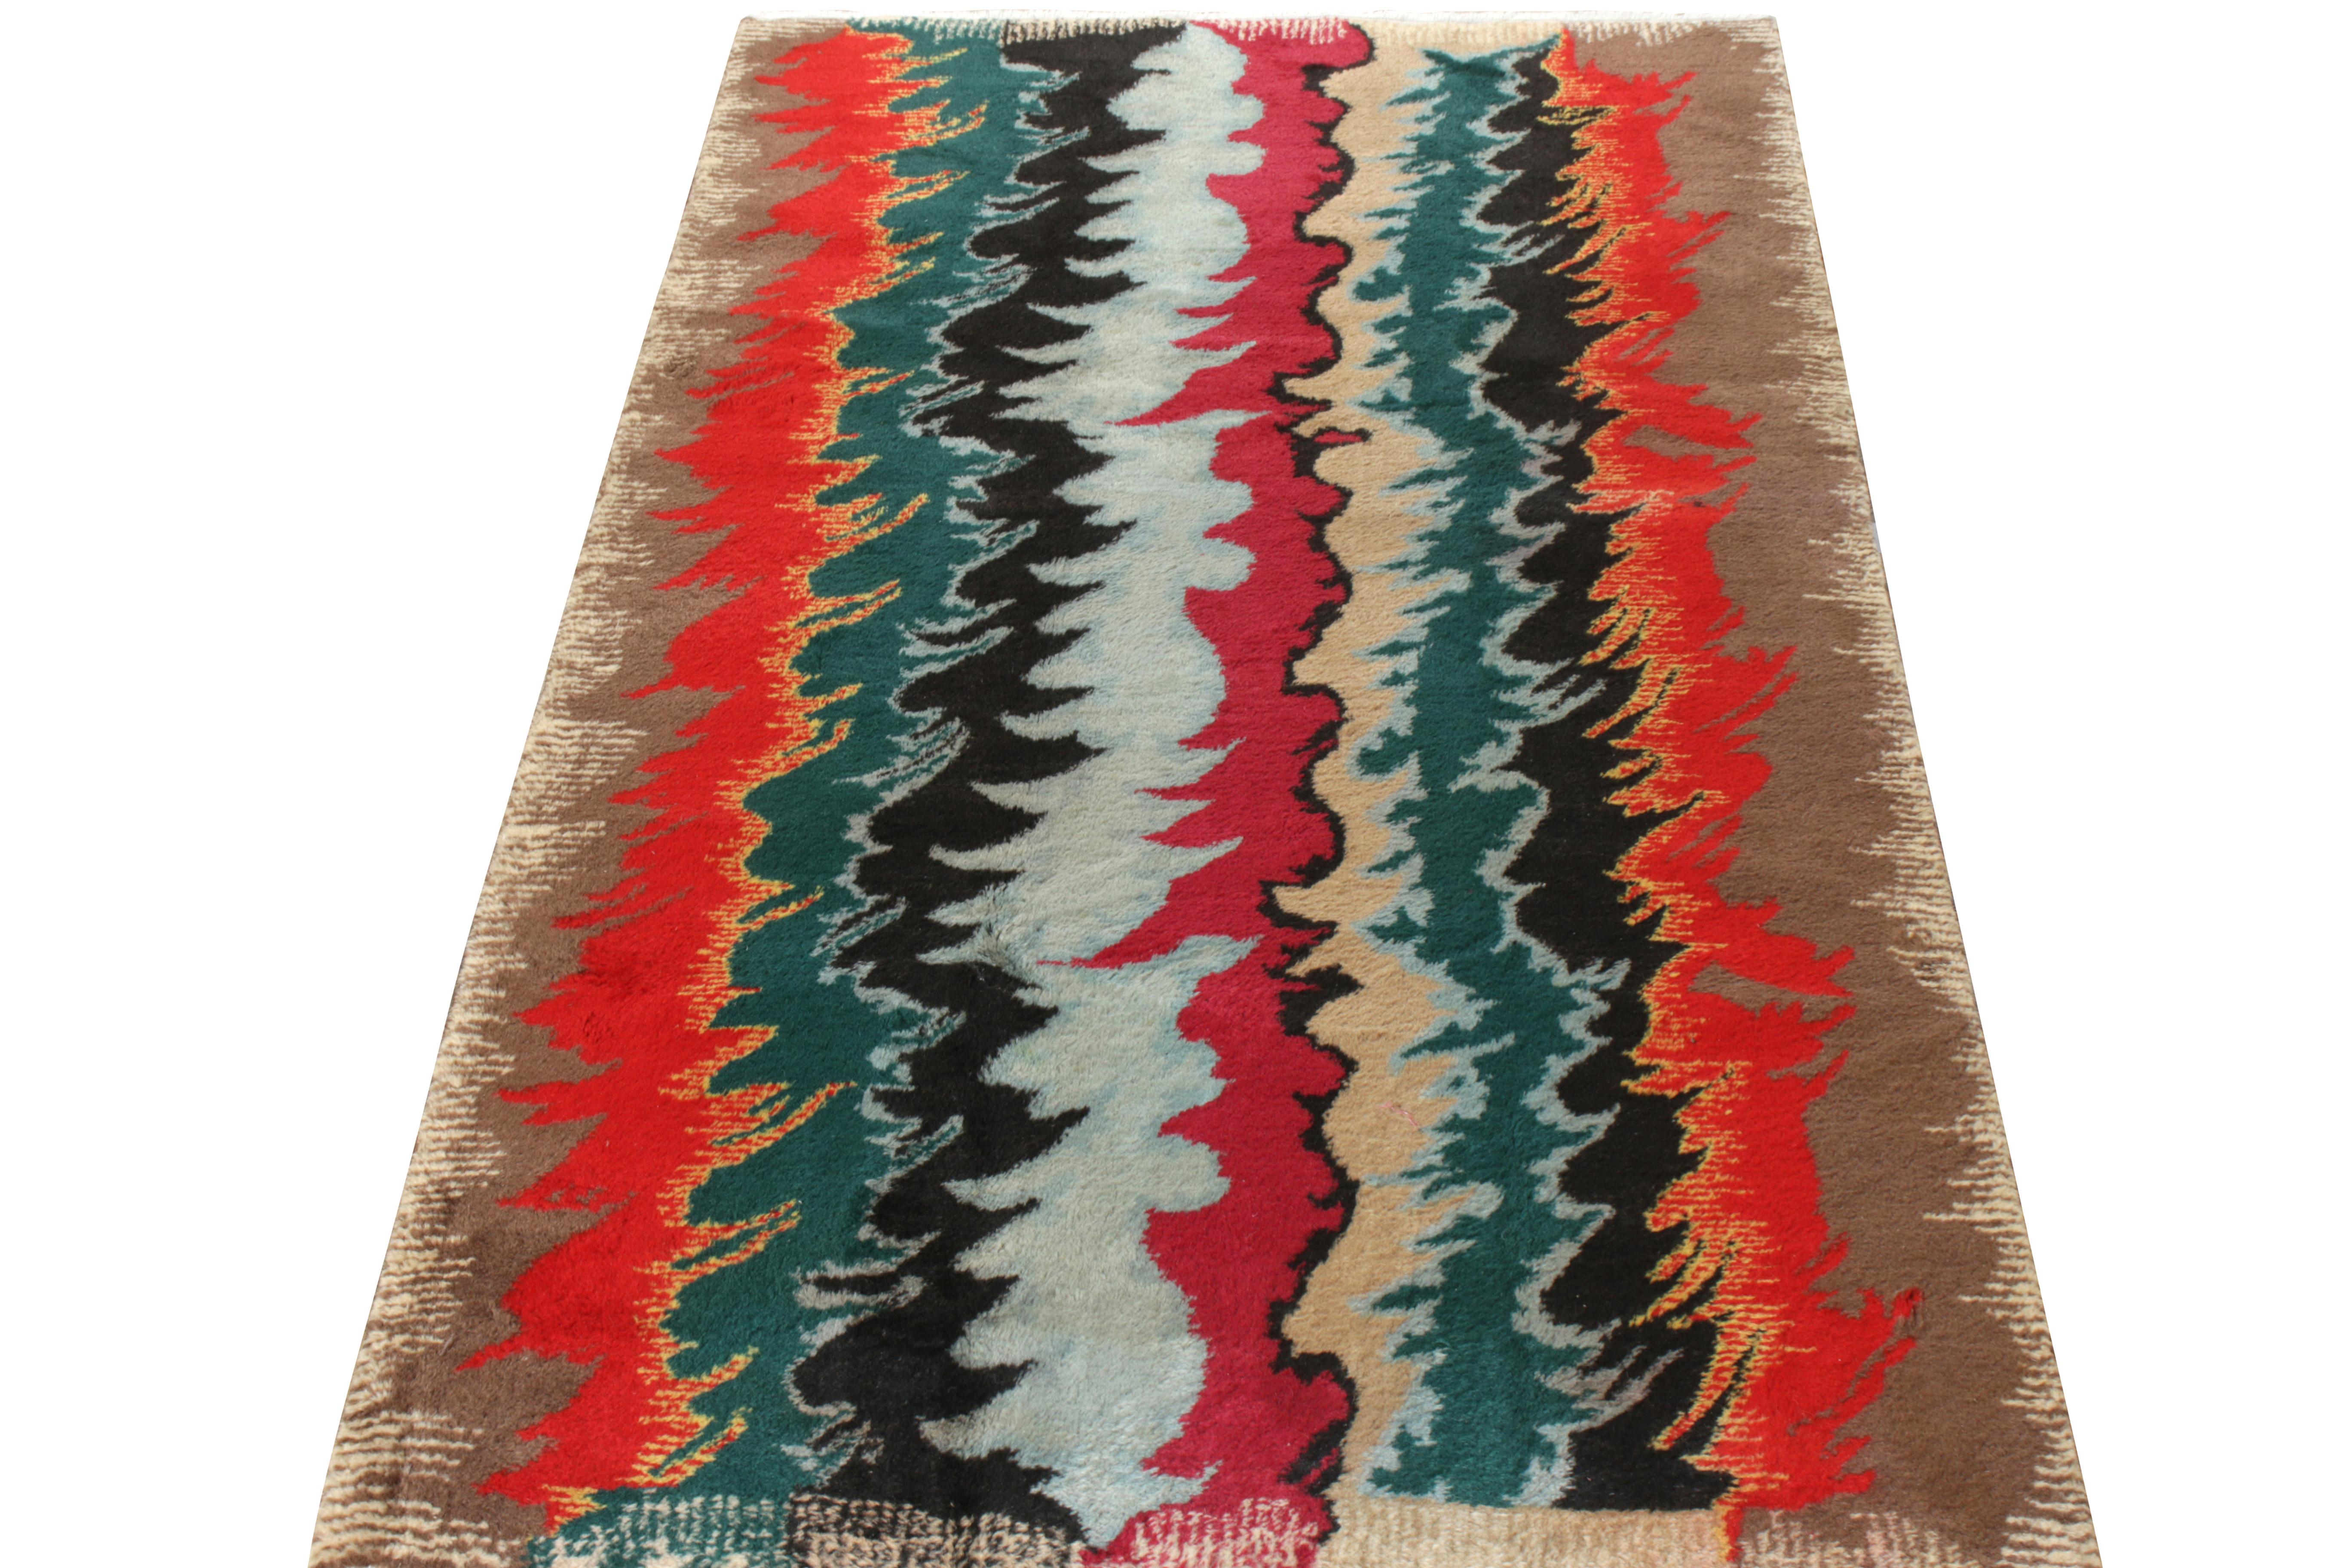 Rug & Kilim takes pride in presenting this glorious vintage 4x7 rug addition to its Mid-Century Pasha Collection, which includes handpicked pieces of the revered Turkish designer Zeki Muren. Featuring one of his most revered themes in a very